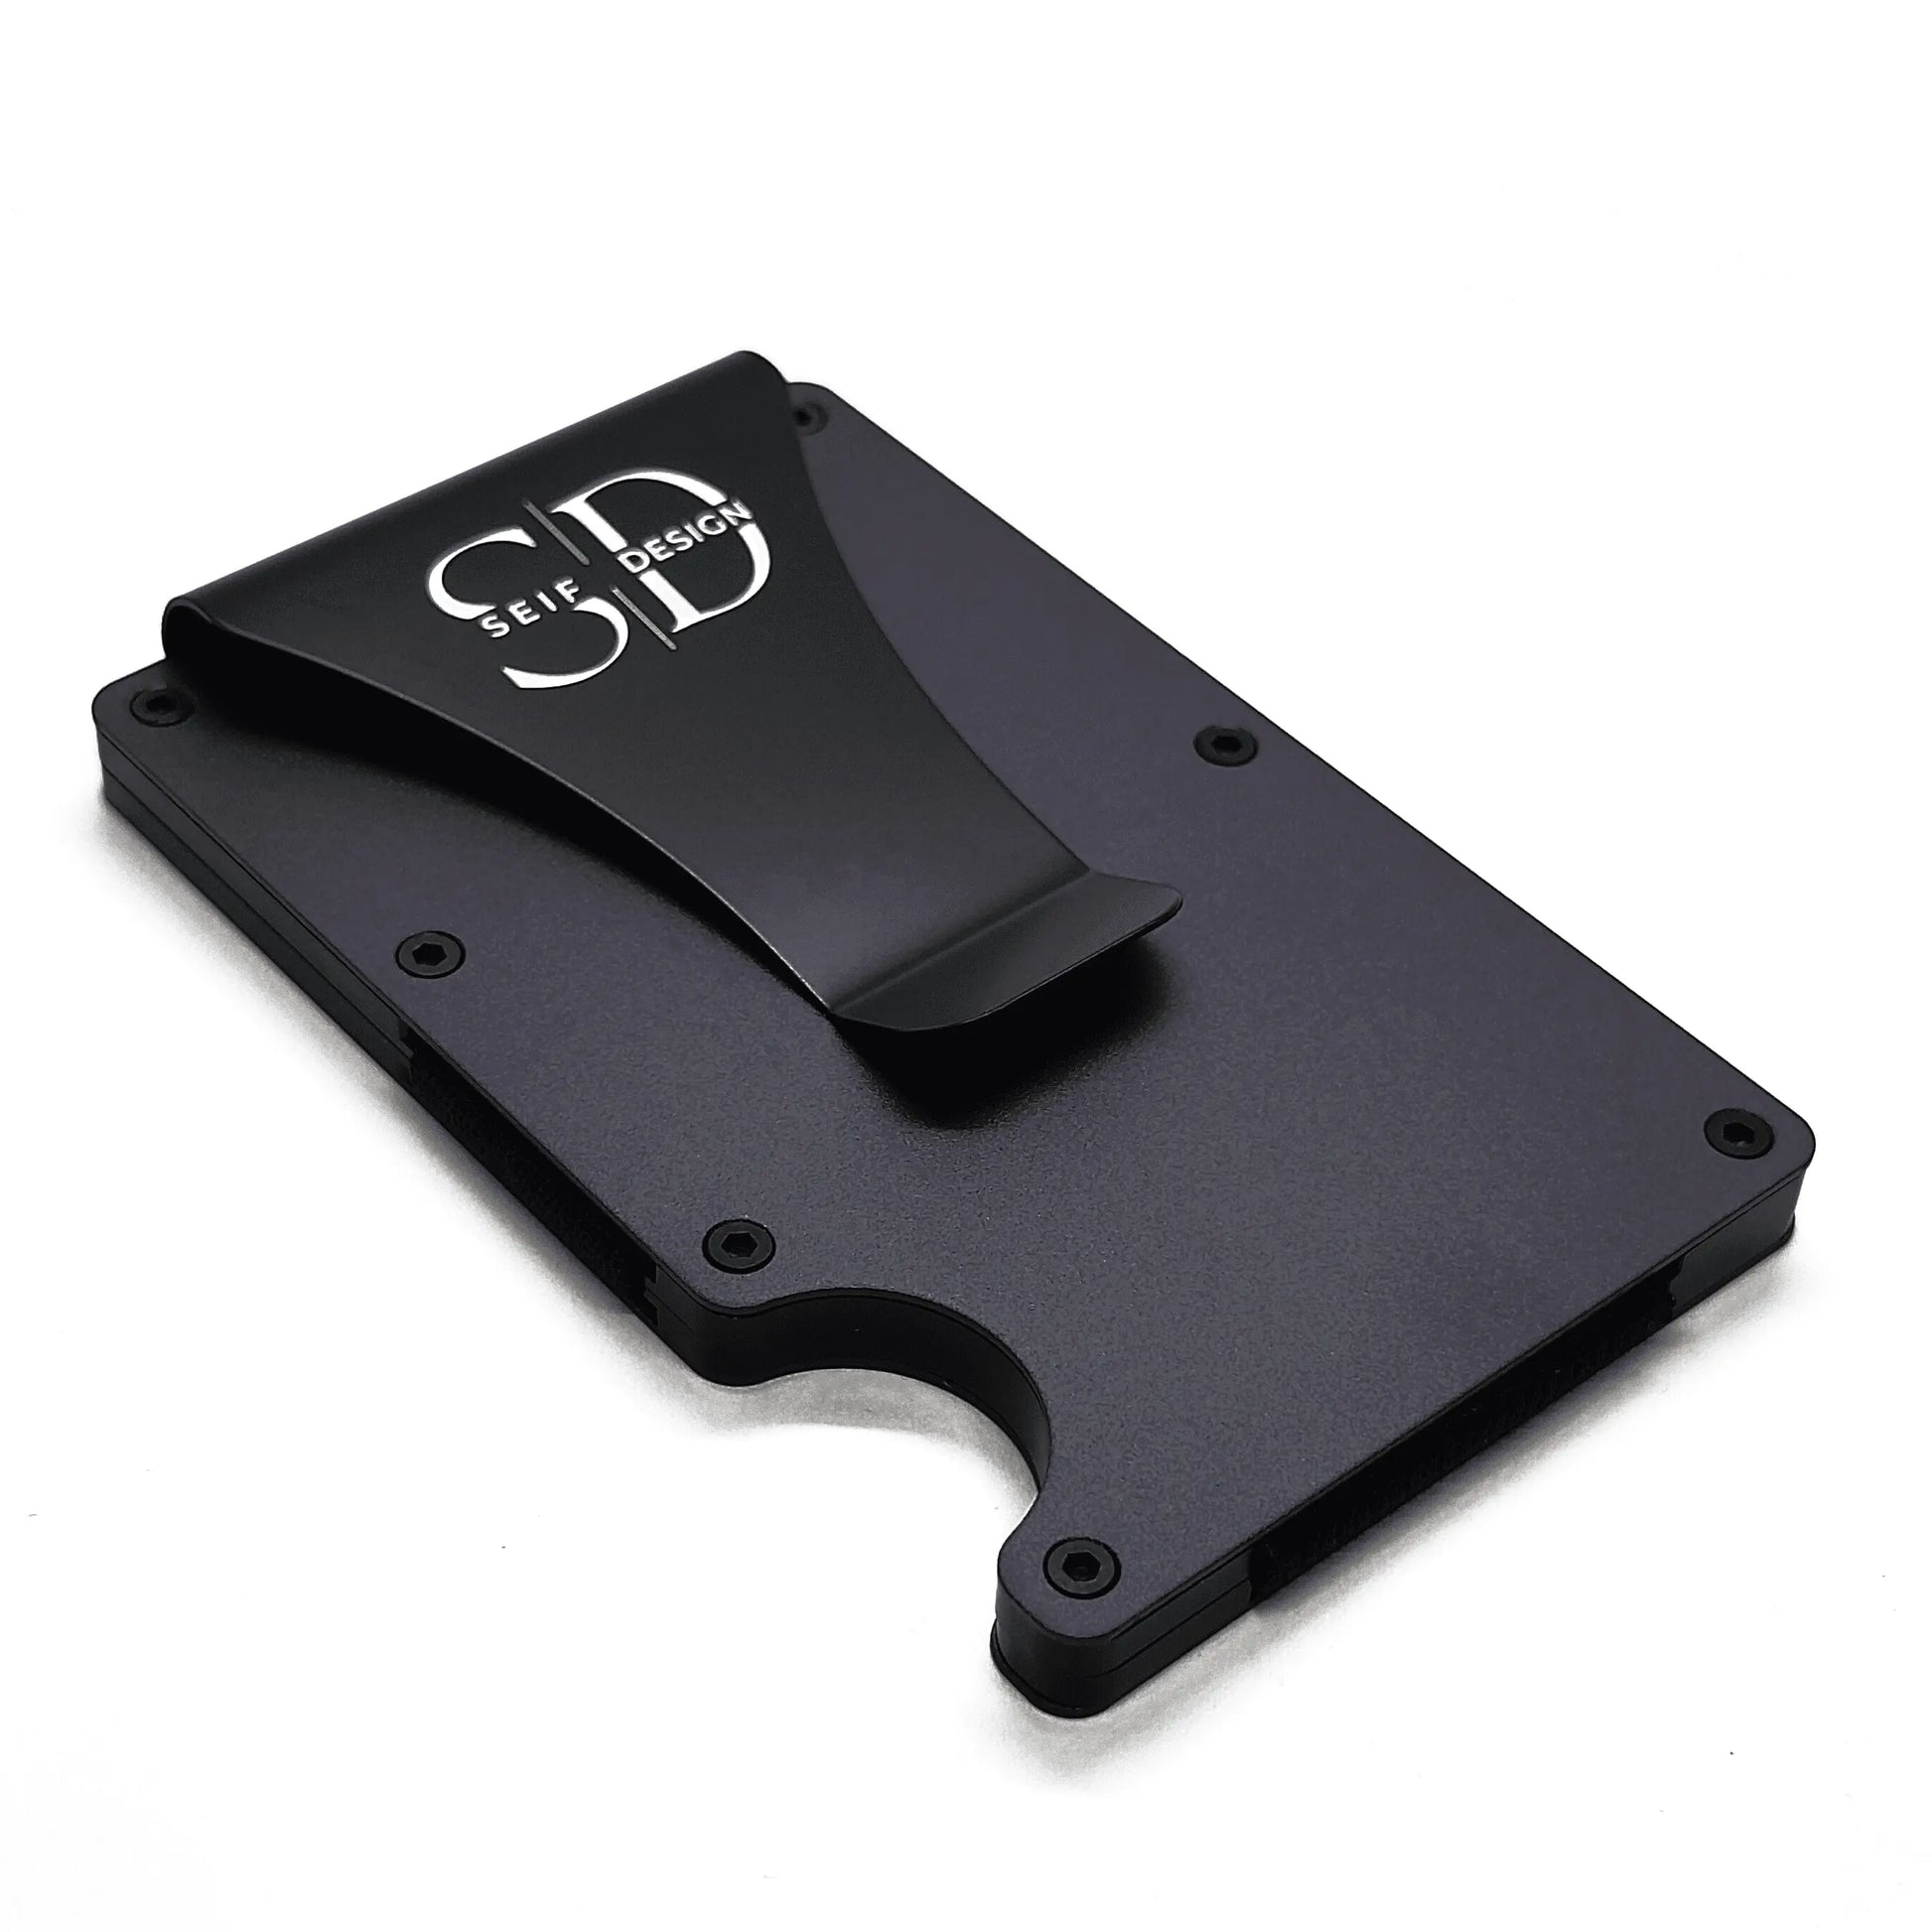 Sleek aluminum cardholder with RFID blocking, holds up to 12 cards. Logo close-up on black surface. Eco-friendly packaging. Lite Storm - Card Holder by Seif Design.